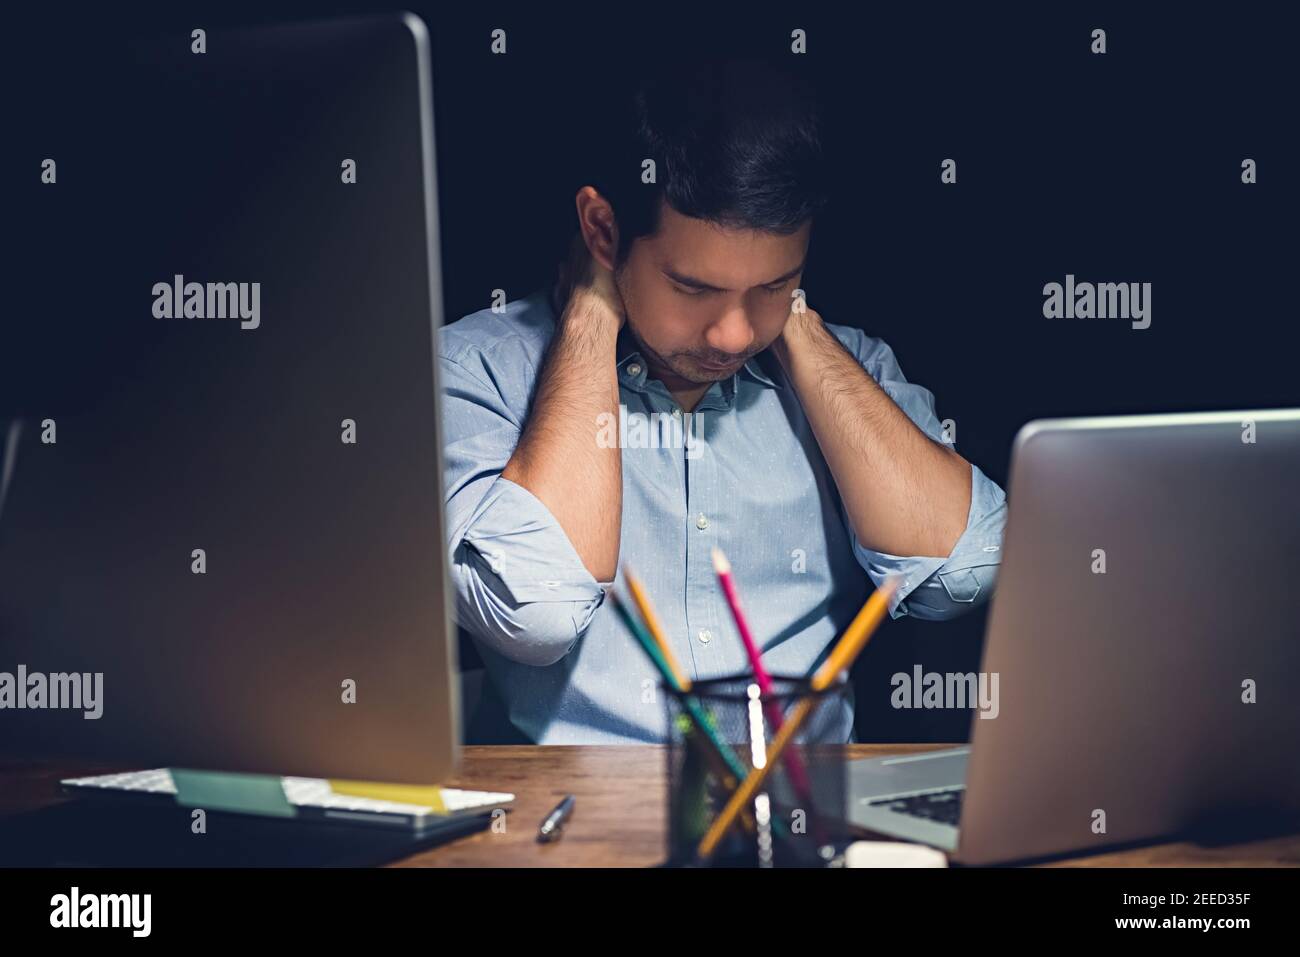 Stressed tired young man having office syndrome , neck pain, while working overtime on his laptop computer at night finishing his project Stock Photo